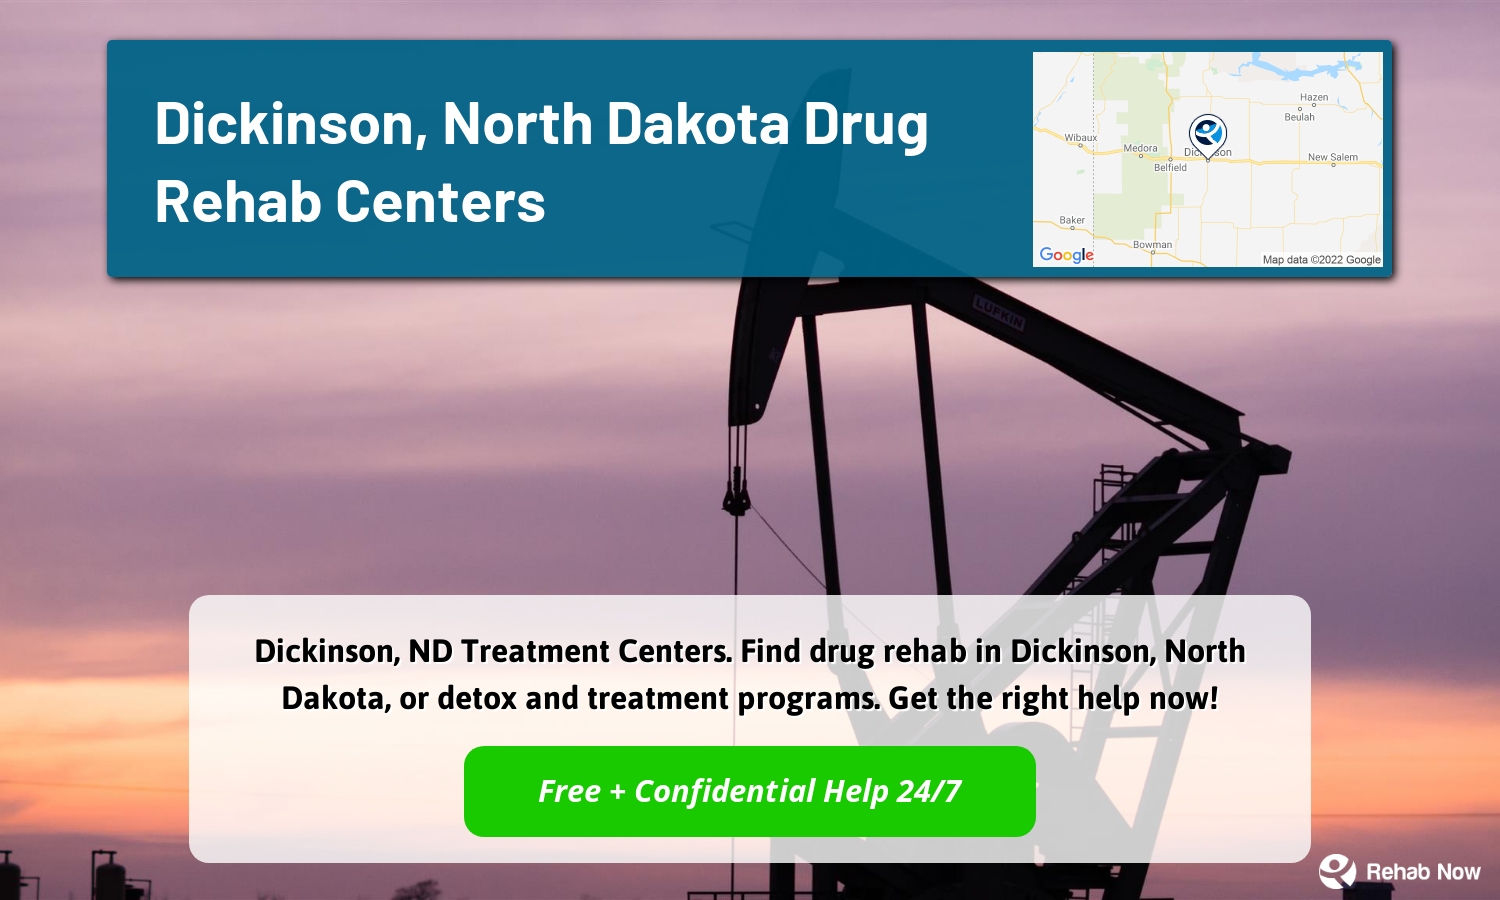 Dickinson, ND Treatment Centers. Find drug rehab in Dickinson, North Dakota, or detox and treatment programs. Get the right help now!